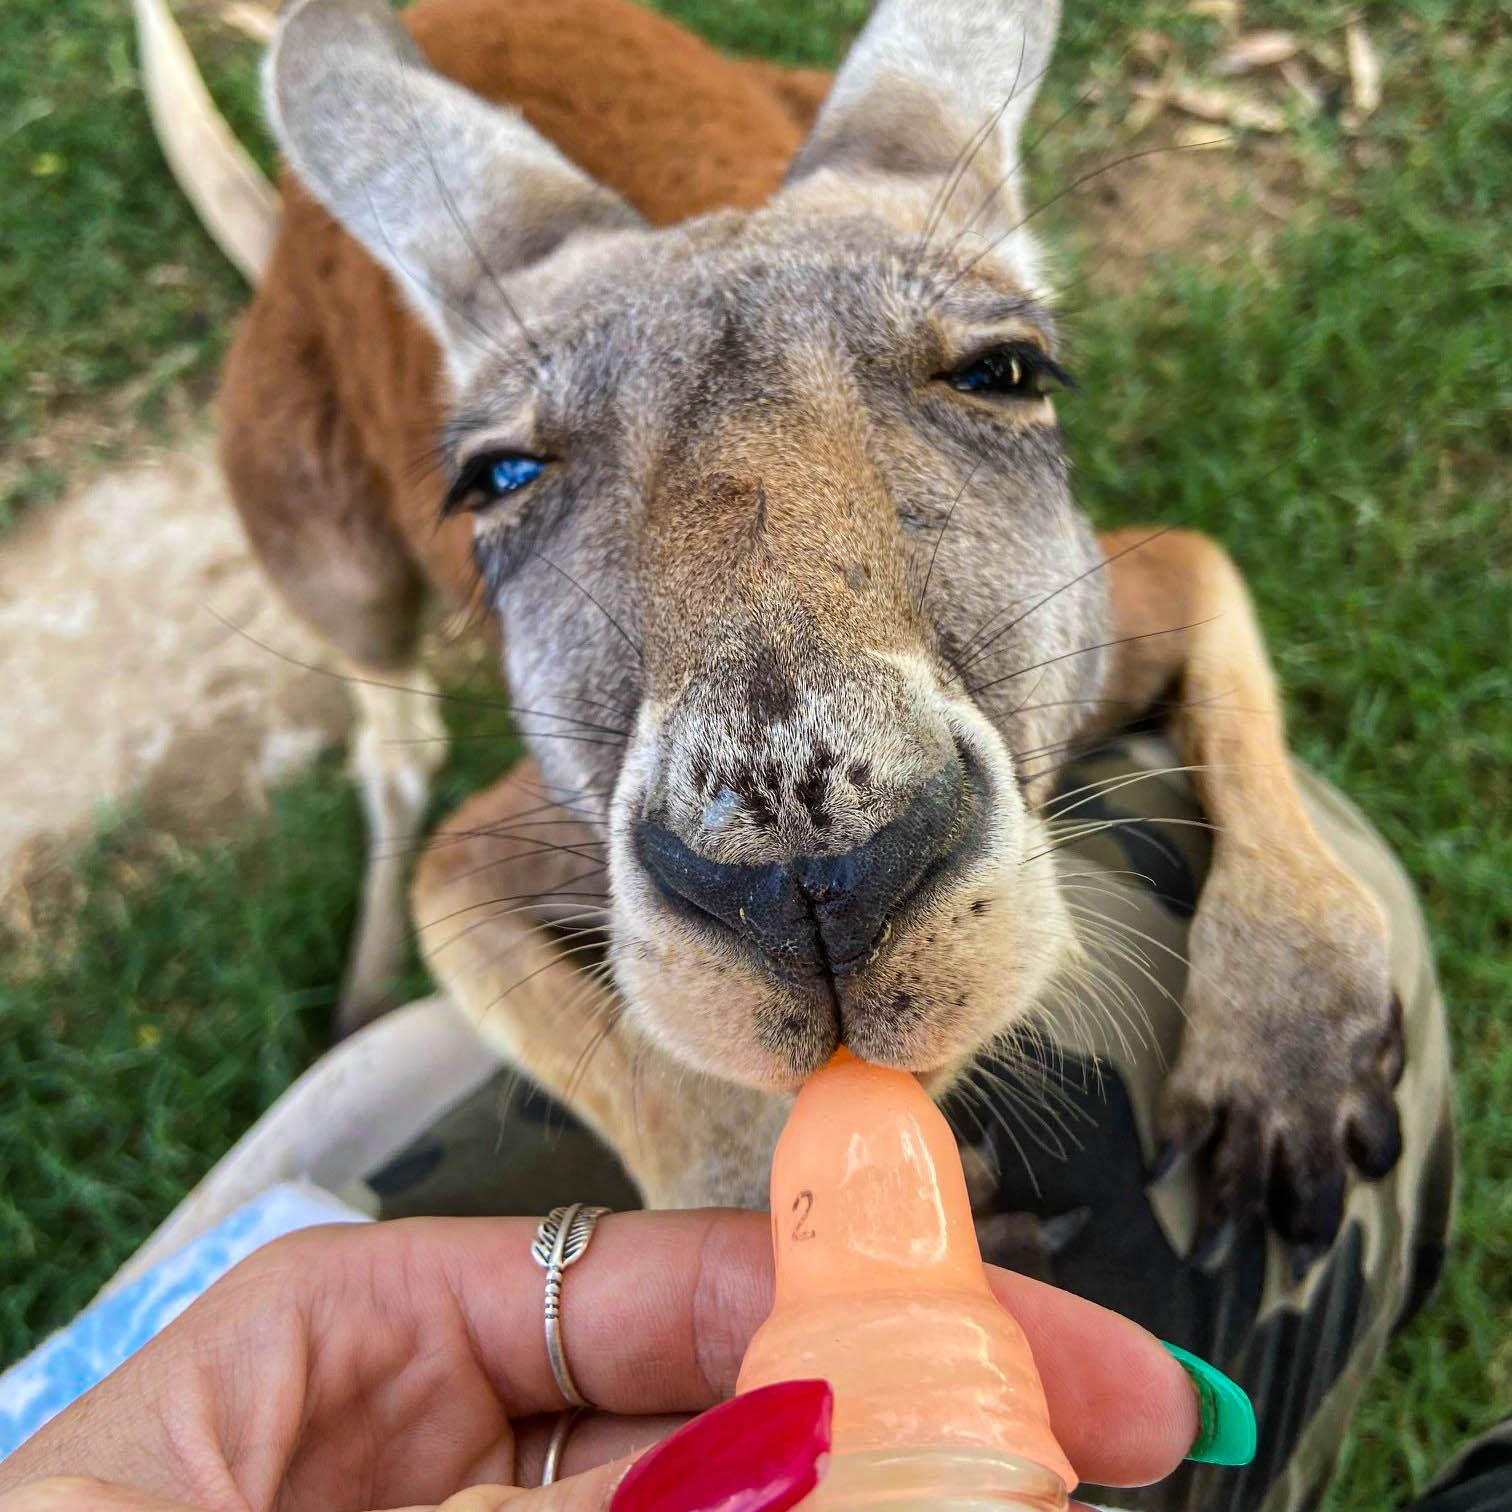 An image of Maisy, the Red Kangaroo under The Agile Project Care